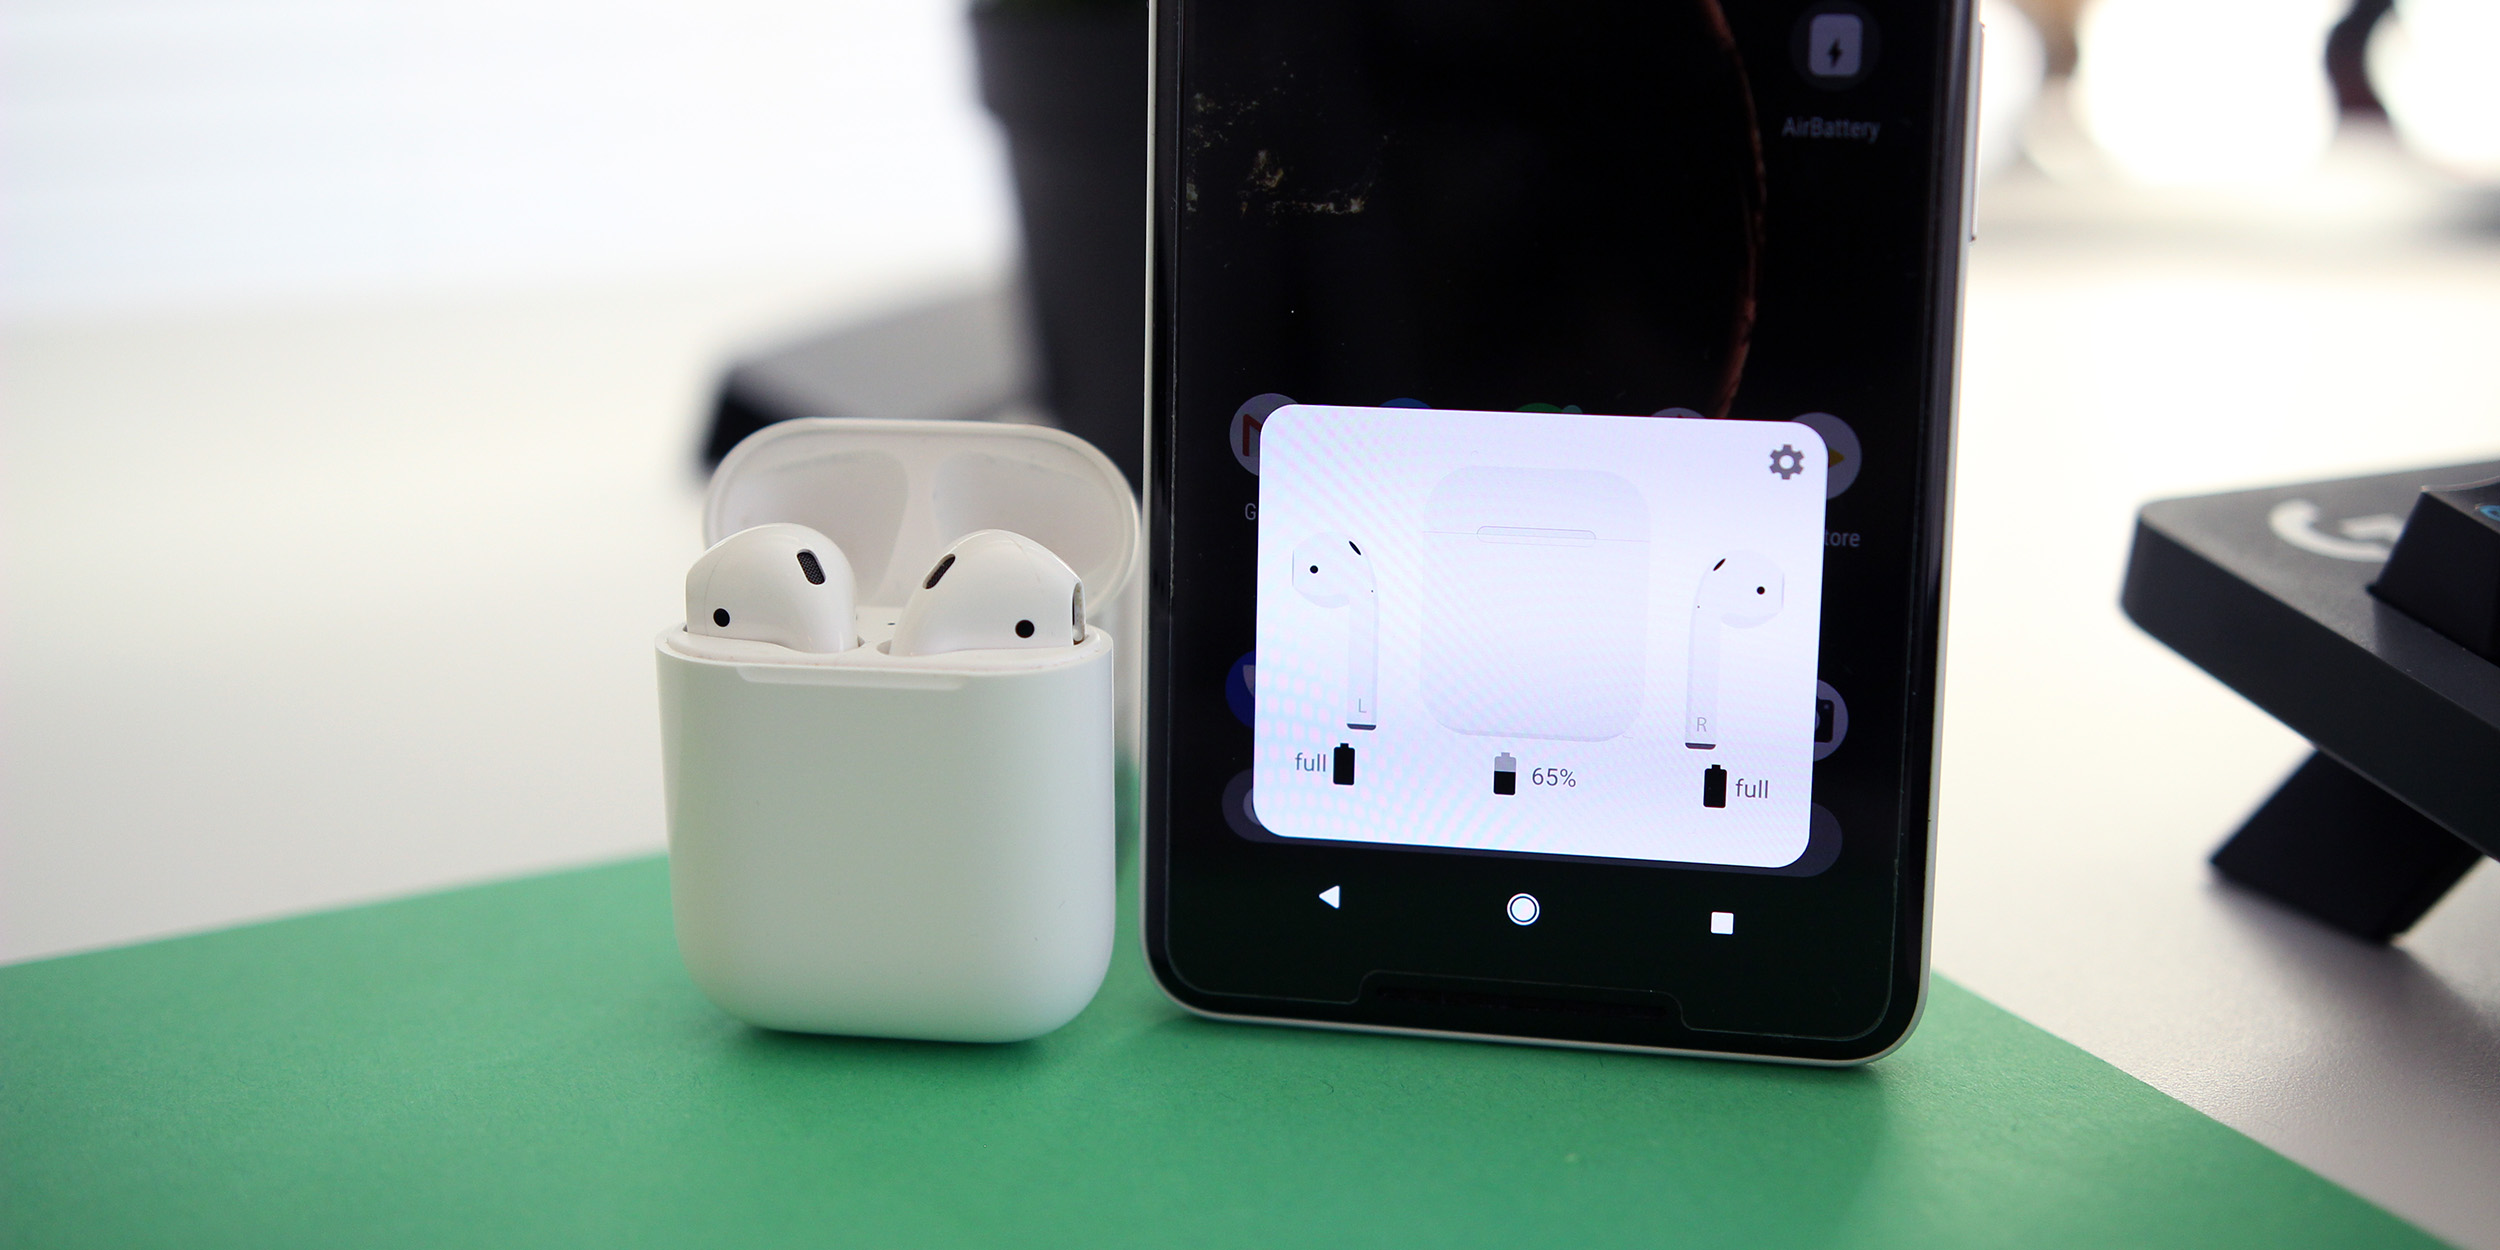 Hands On: 'Airbattery' Tracks The Battery Life Of Airpods When Connected To  Android [Video]